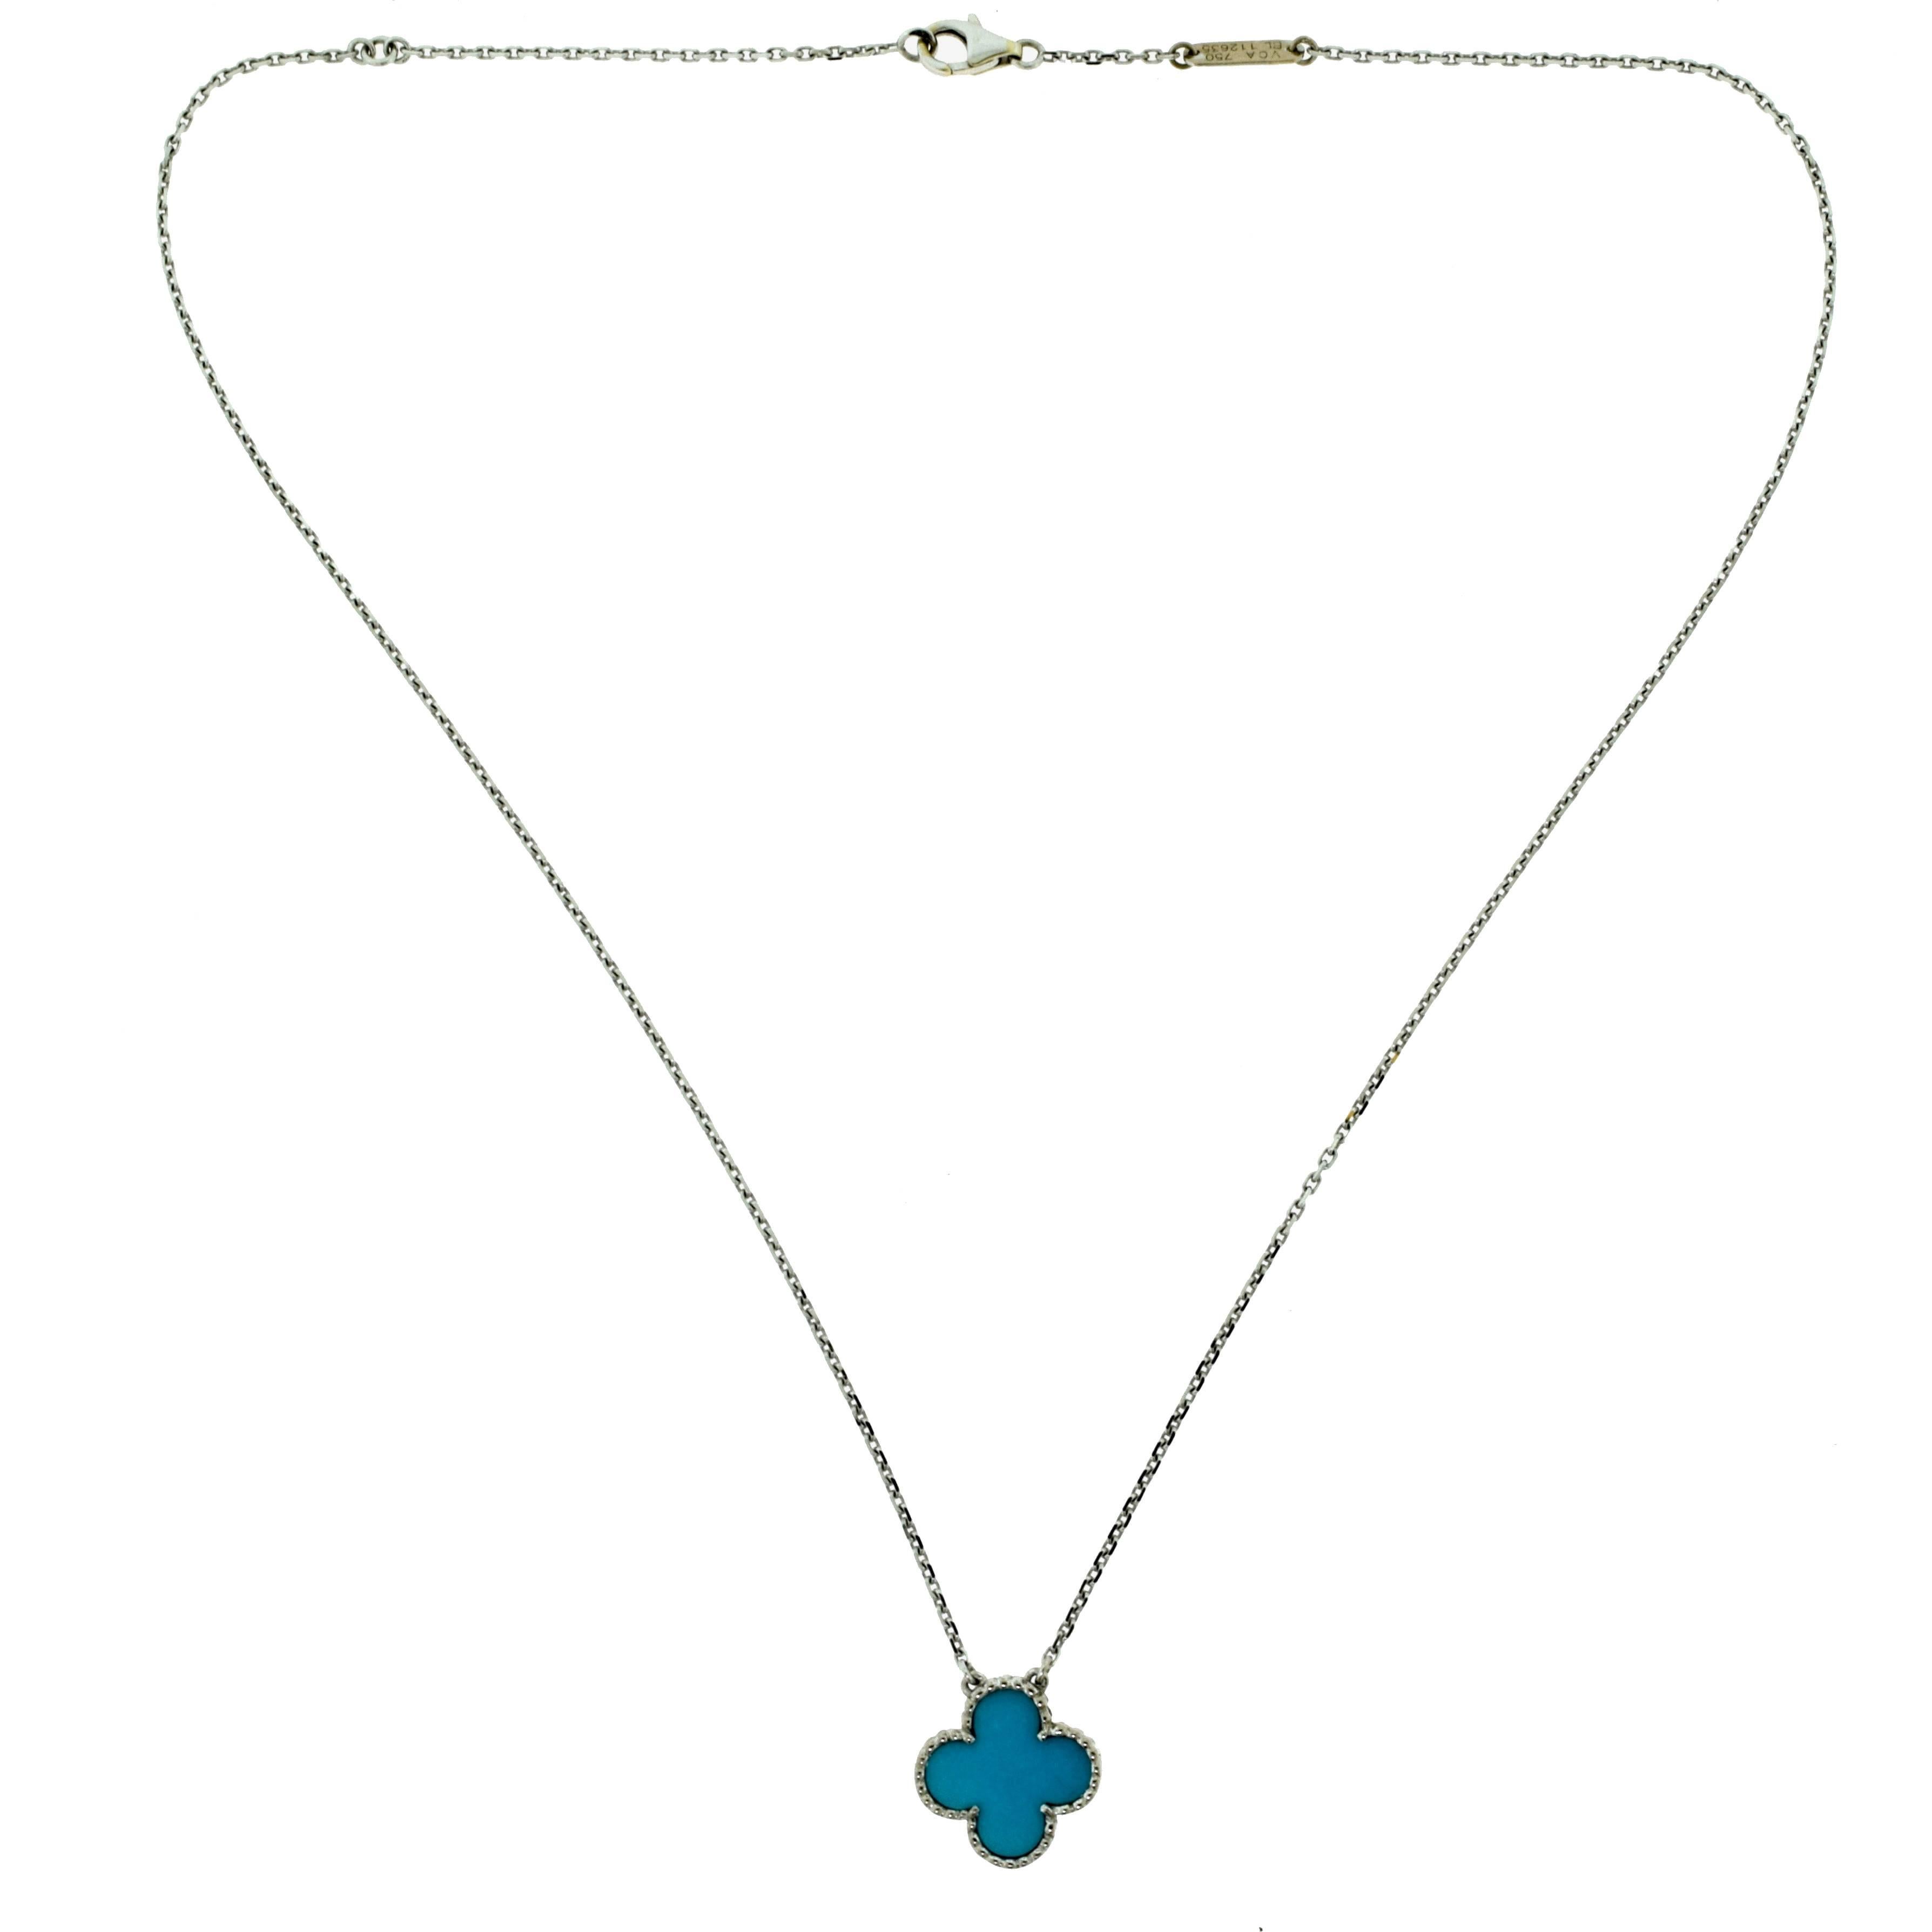 Designer: Van Cleef & Arpels
Collection: Vintage Alhambra
Metal: 18 Karat White Gold
Stones: 1 Turquoise Stone
Total Item Weight (g): 5.5
Chain Length: 16.5 inches ; 14.75 inches
Motif Dimensions: 14.59 x 13.61 x 3.04 mm
Hallmark: VCA 750 Serial